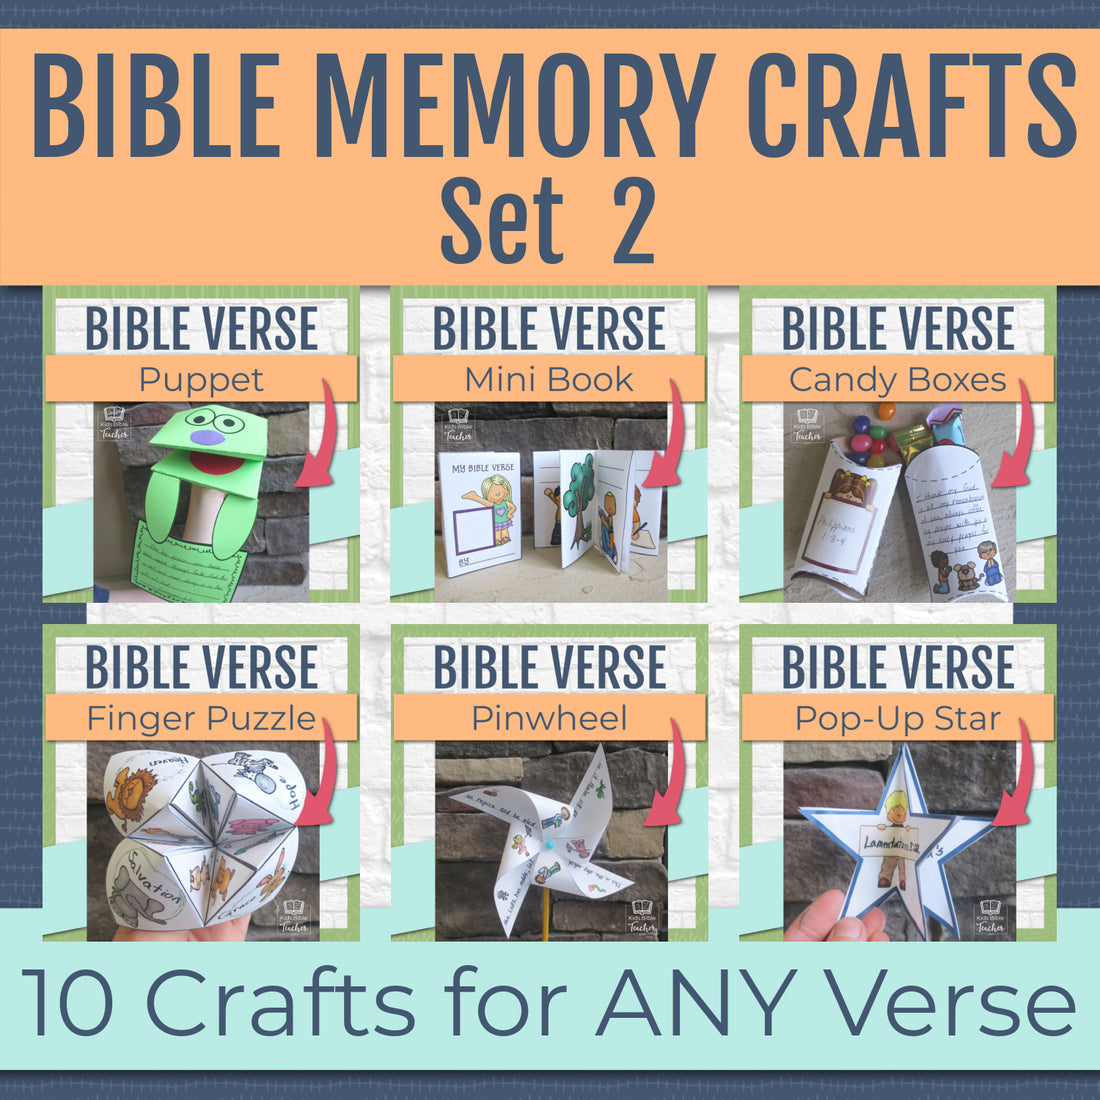 Books of the Bible Craft – Easy Bible Crafts for kids